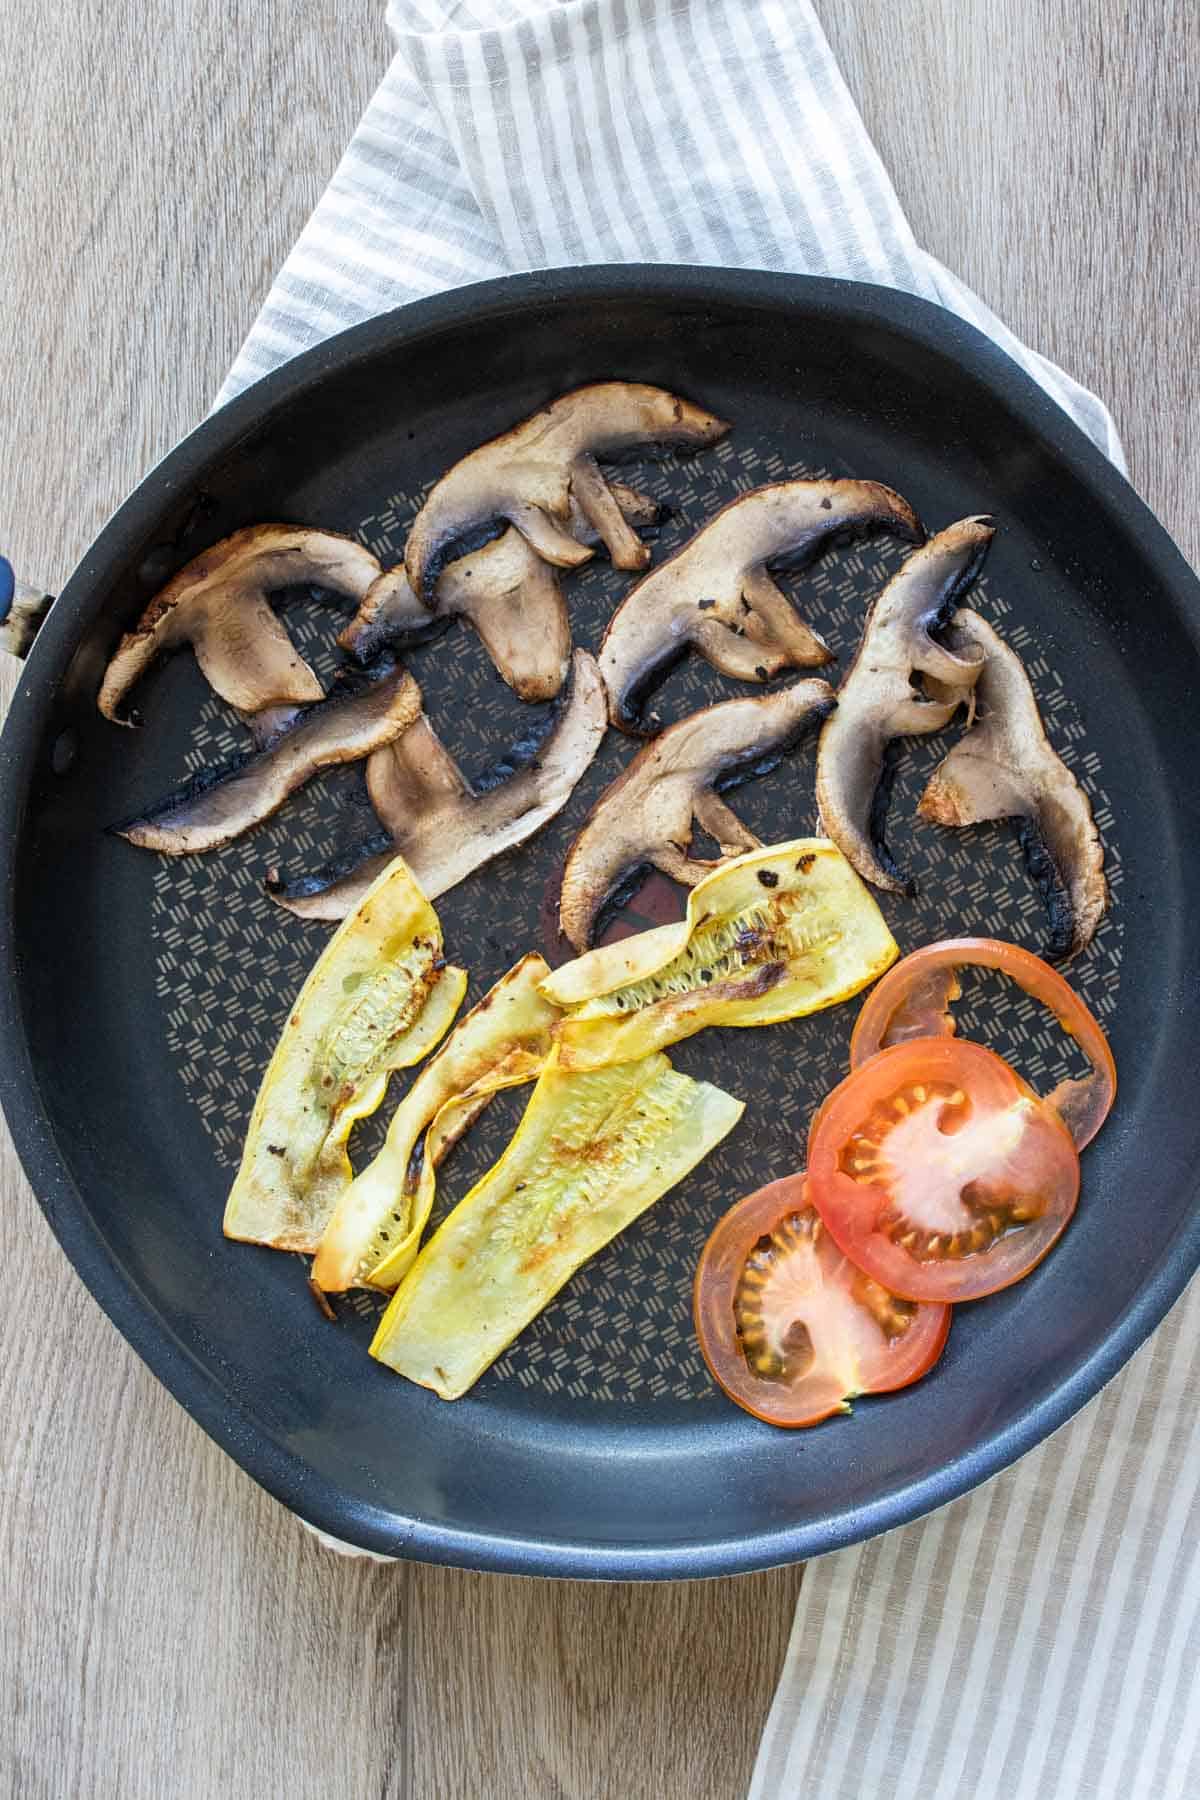 A pan with sliced mushrooms, squash and tomatoes being cooked inside